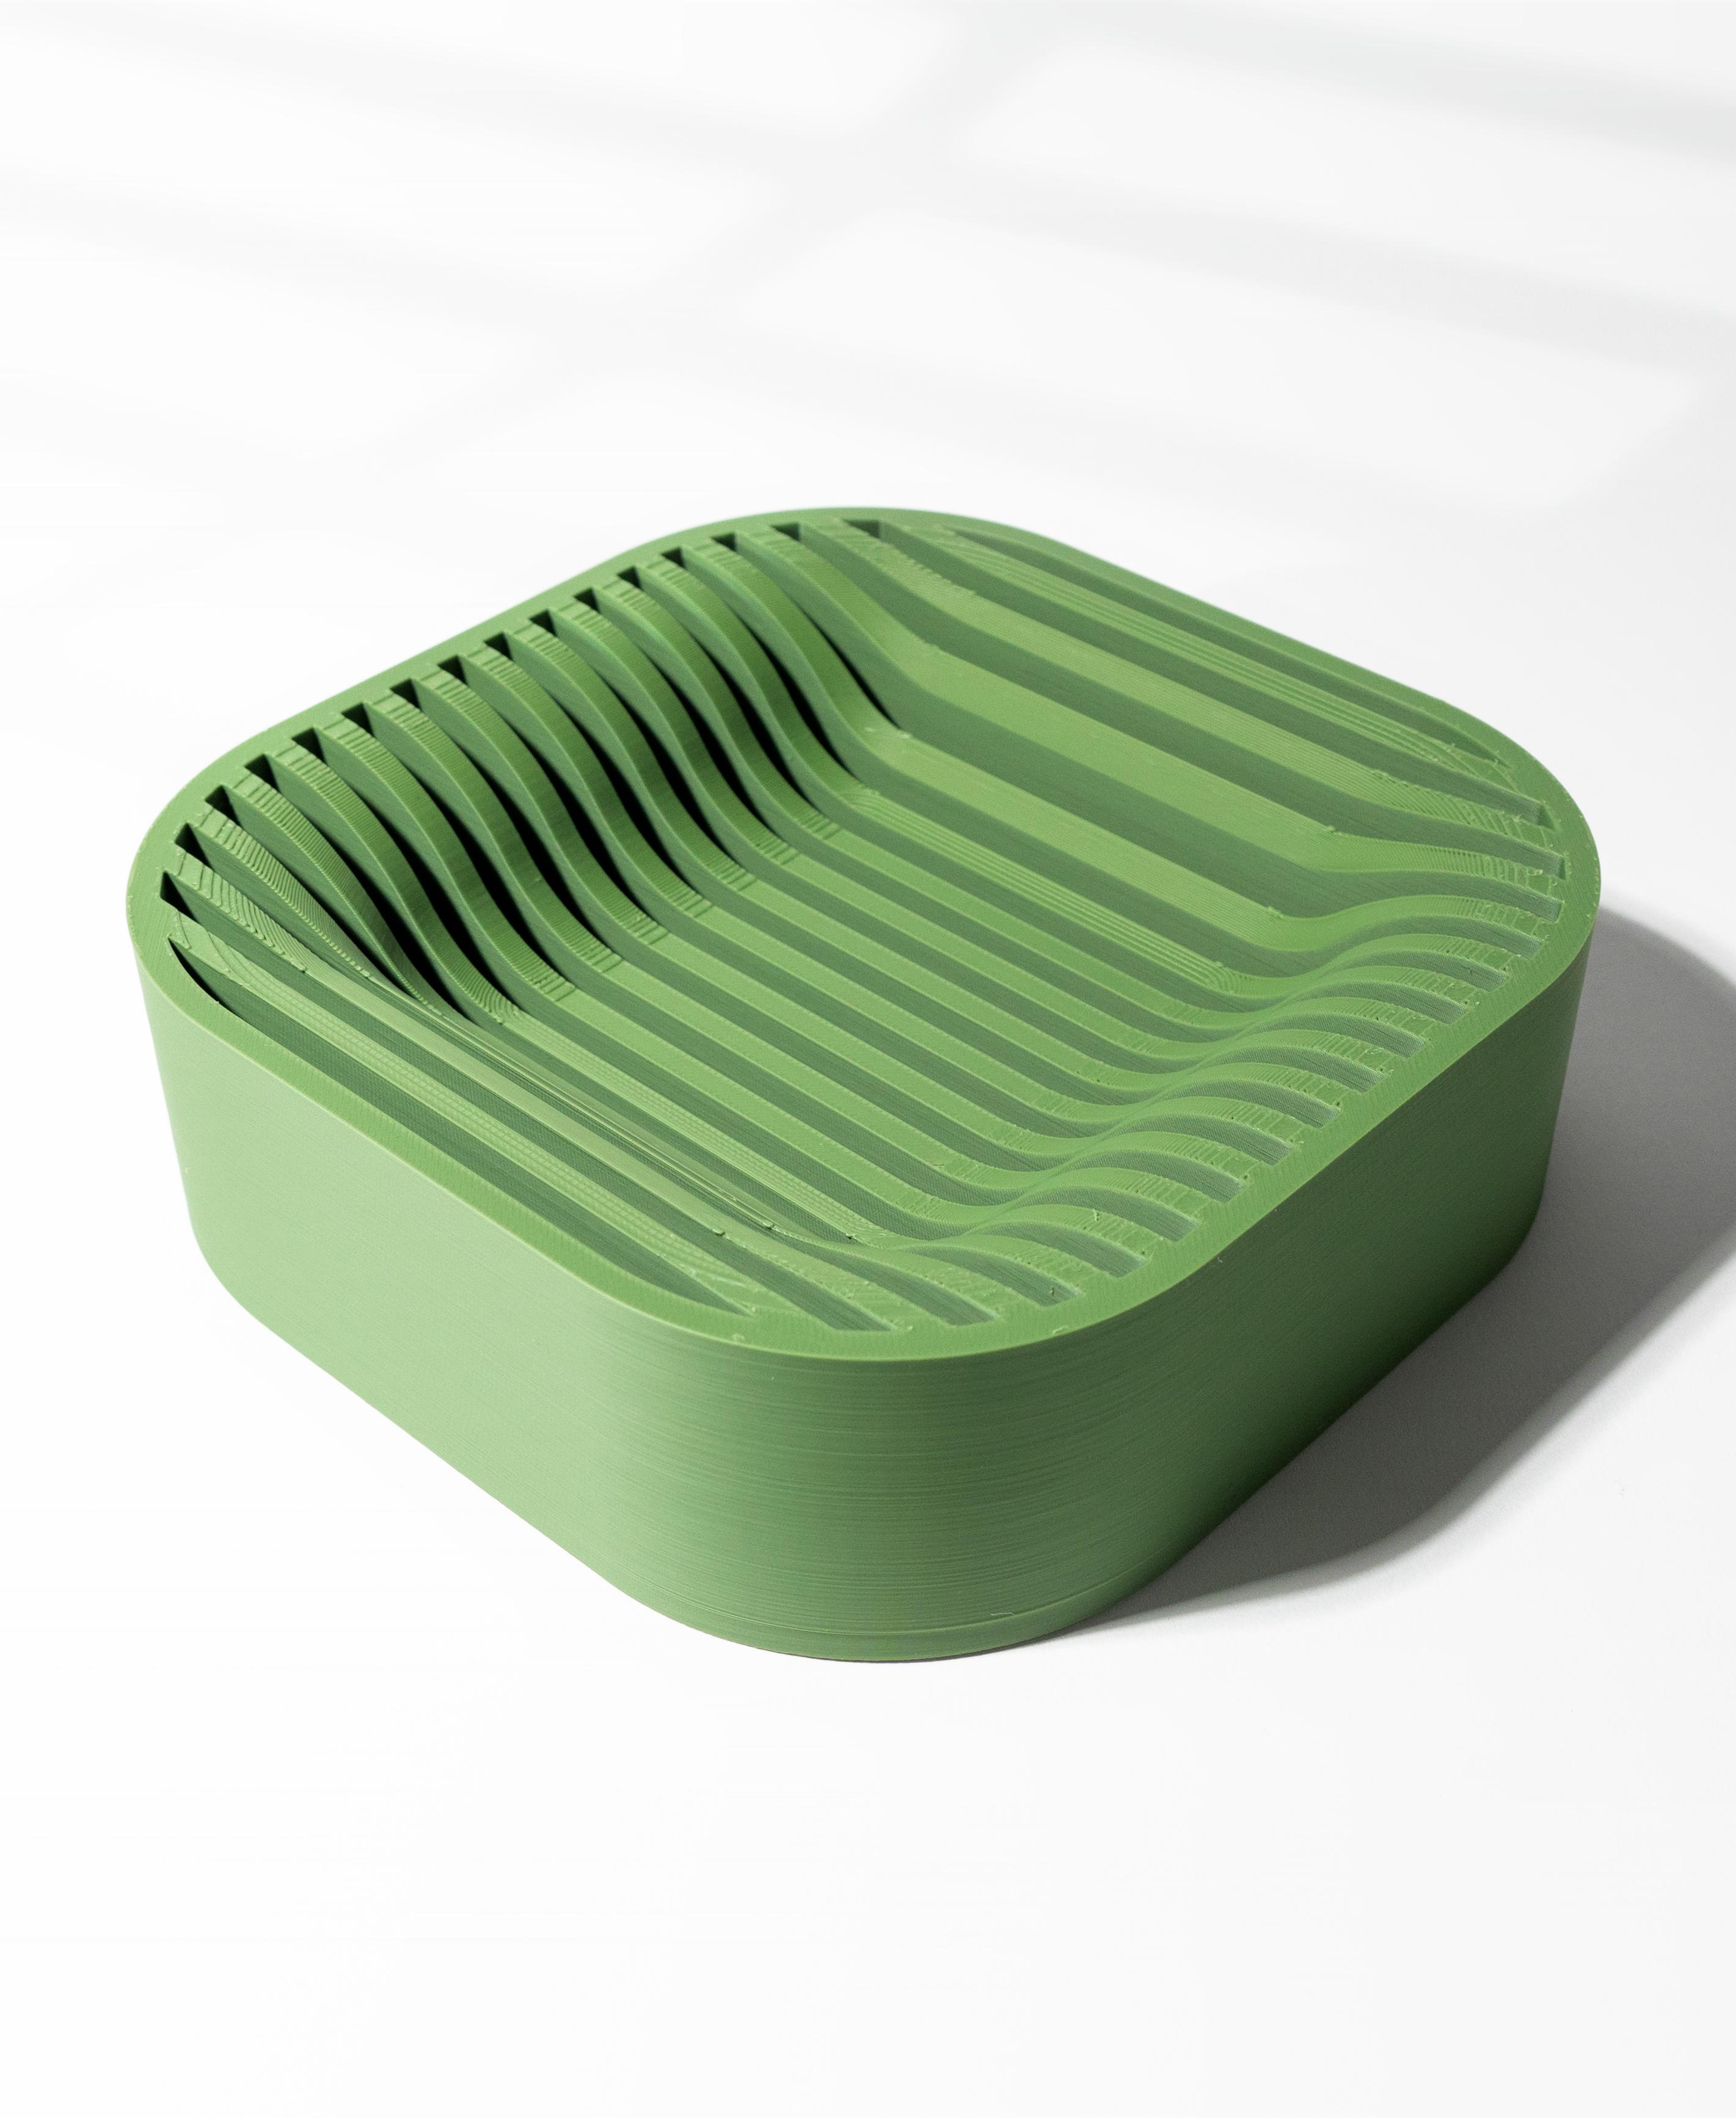 The Valo Catch-all Tray or Desk Organizer Bowl | Modern Office and Home Decor 3d model